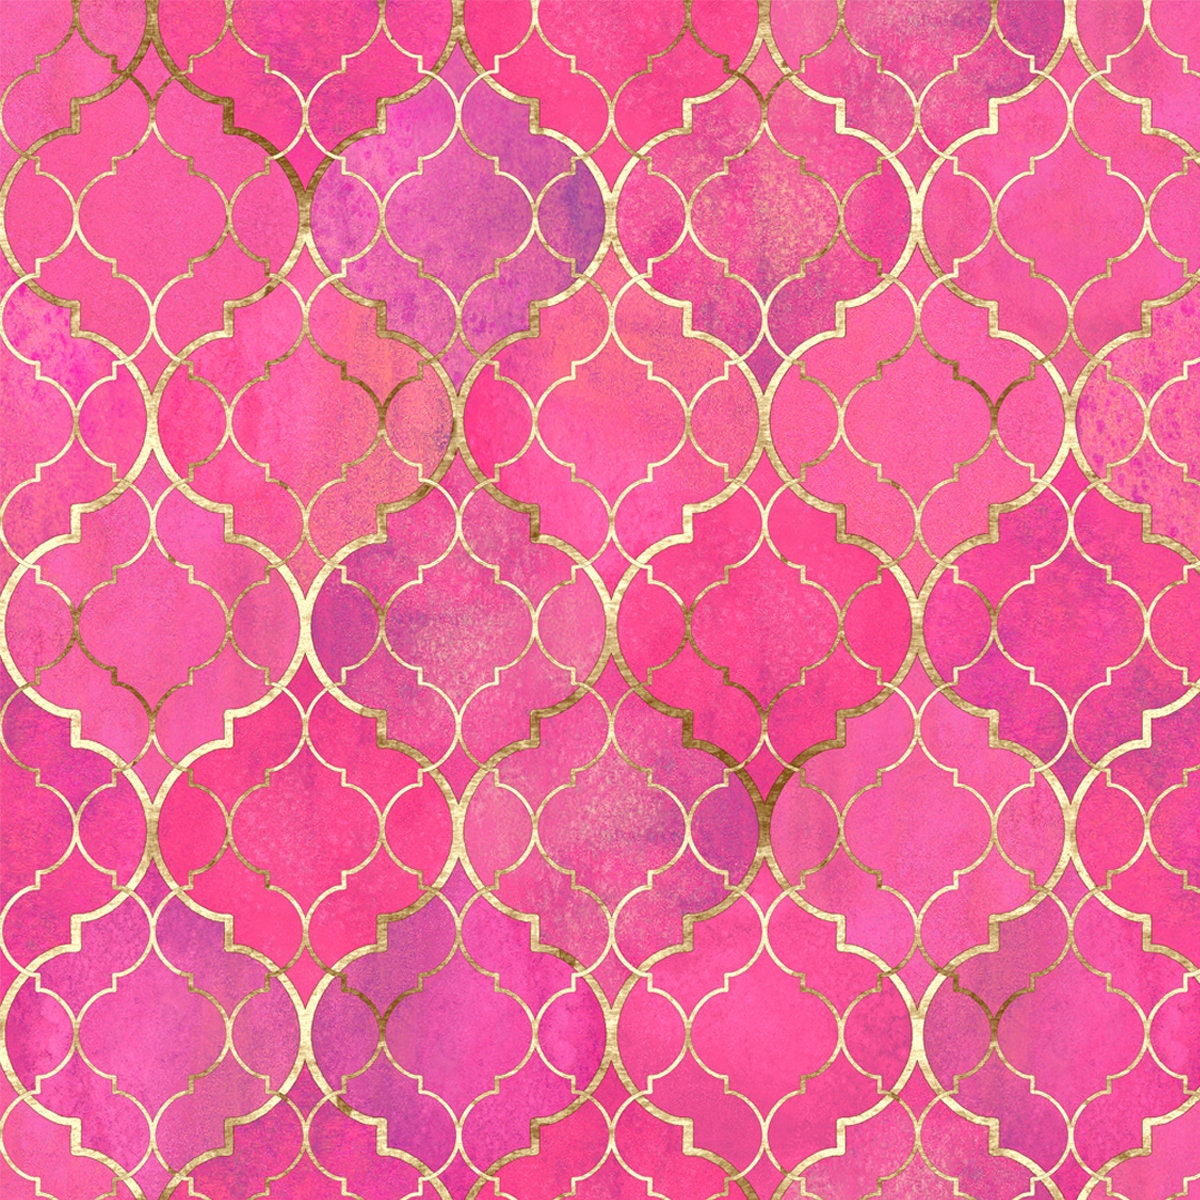 Watercolor Abstract Geometric Seamless Pattern. Vintage Decorative Moroccan Texture with Gold Line Wallpaper Girl Bedroom Mural